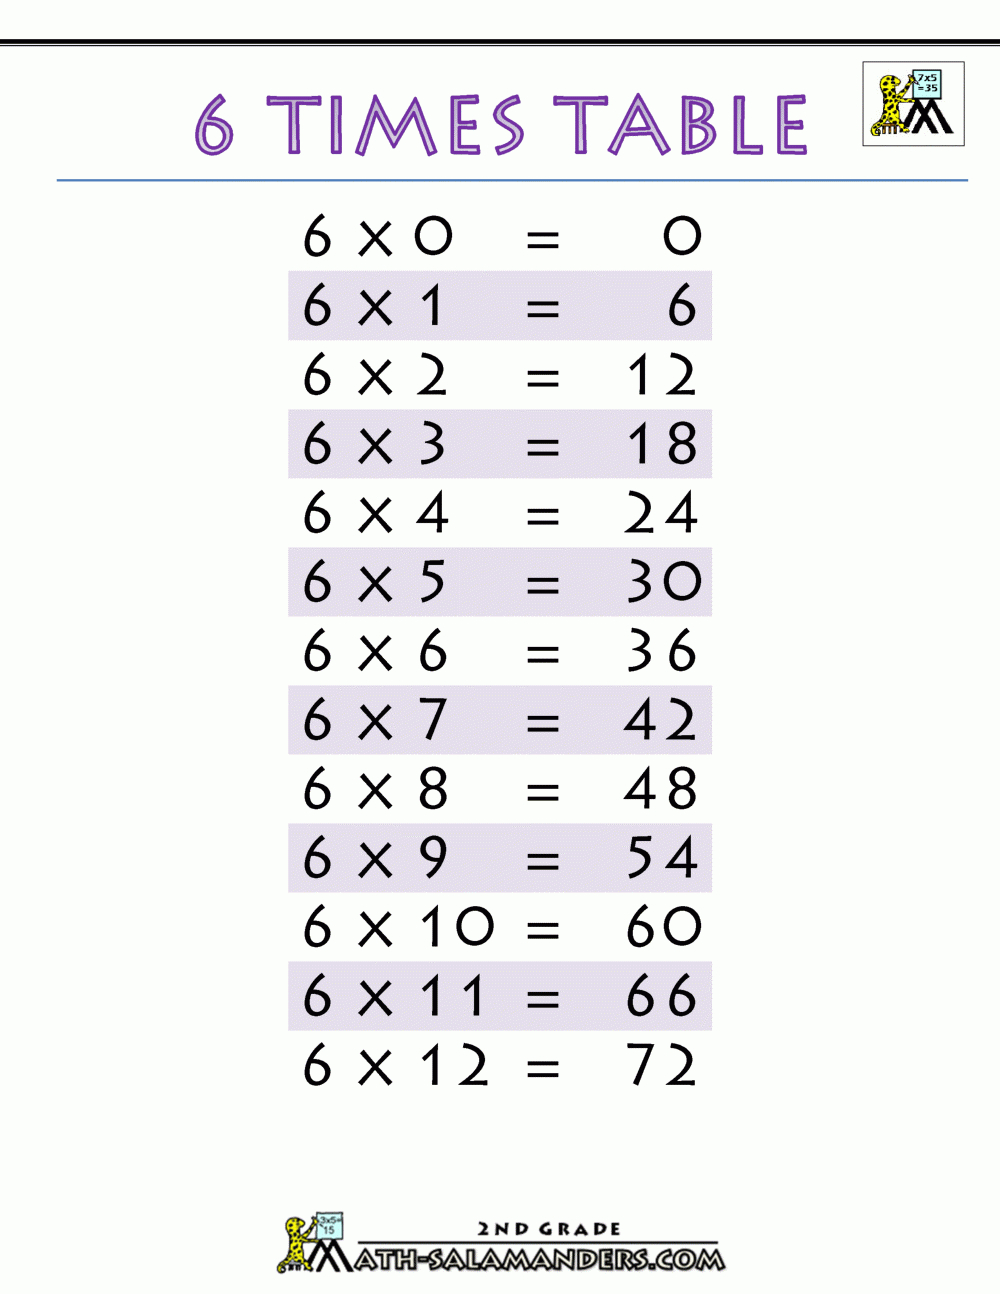 6 Times Table in Printable Multiplication Table 6